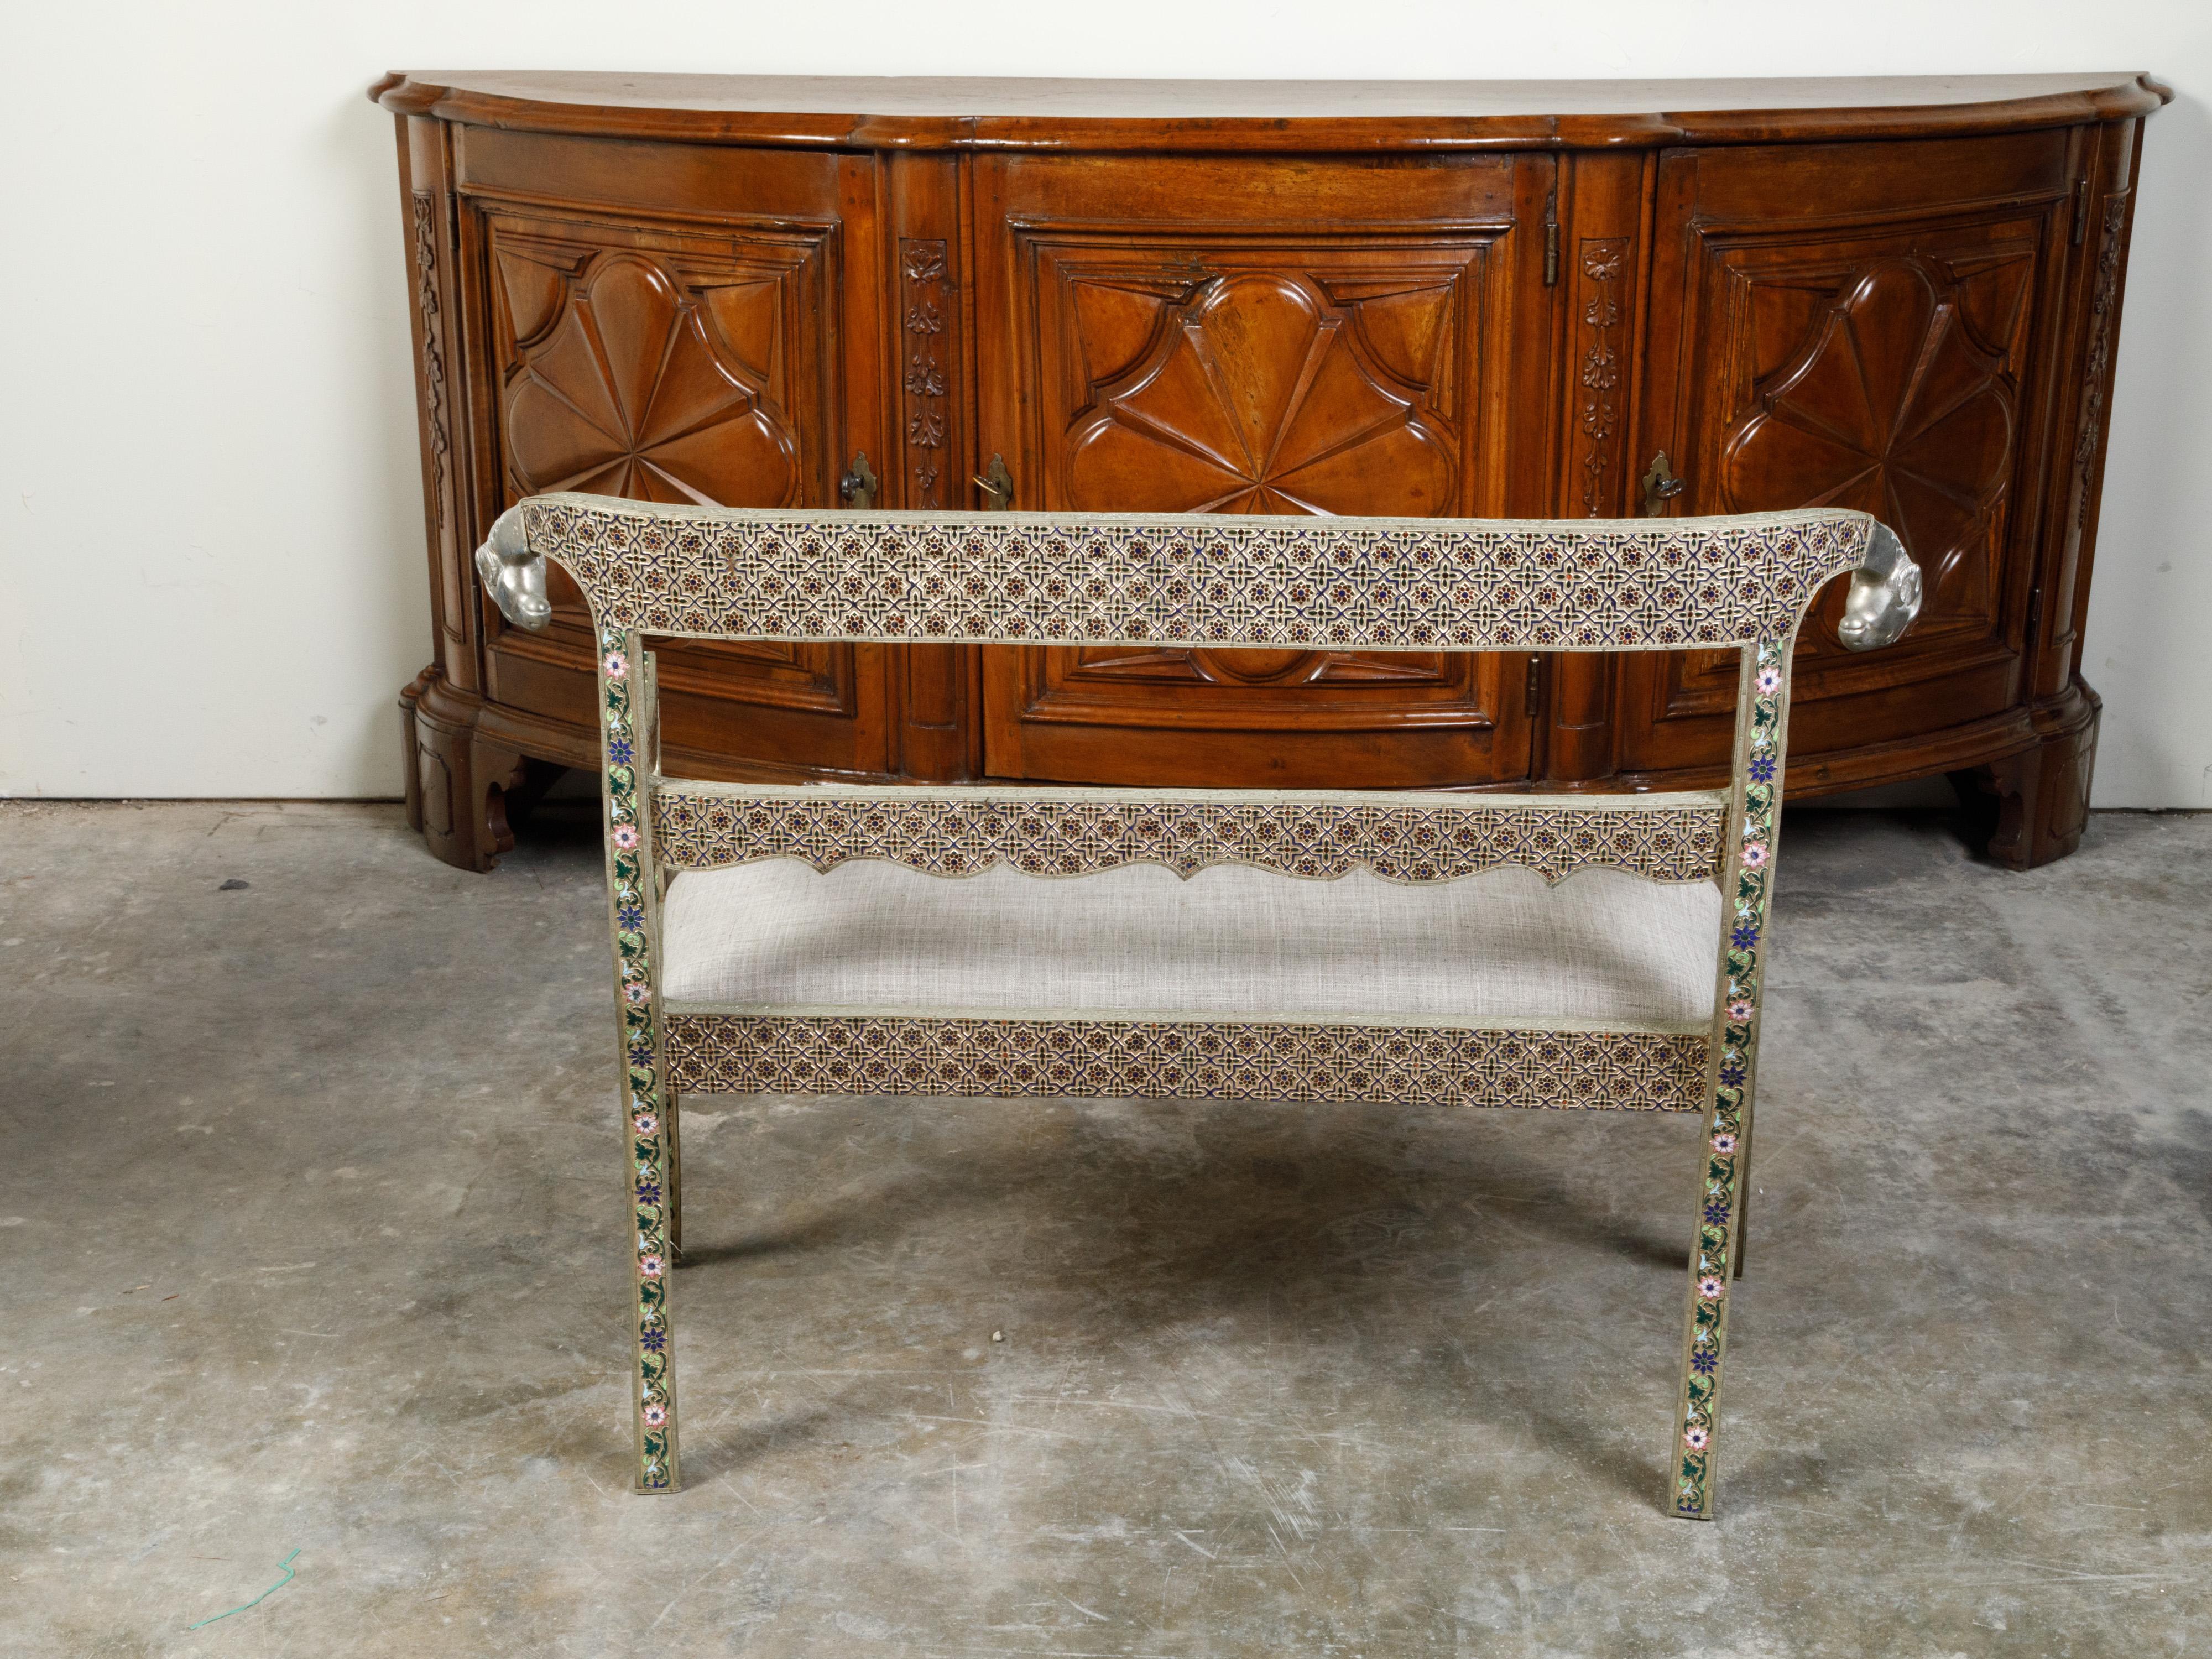 20th Century 1930s Moroccan Metal Upholstered Settee with Enamel Décor and Rams' Heads For Sale